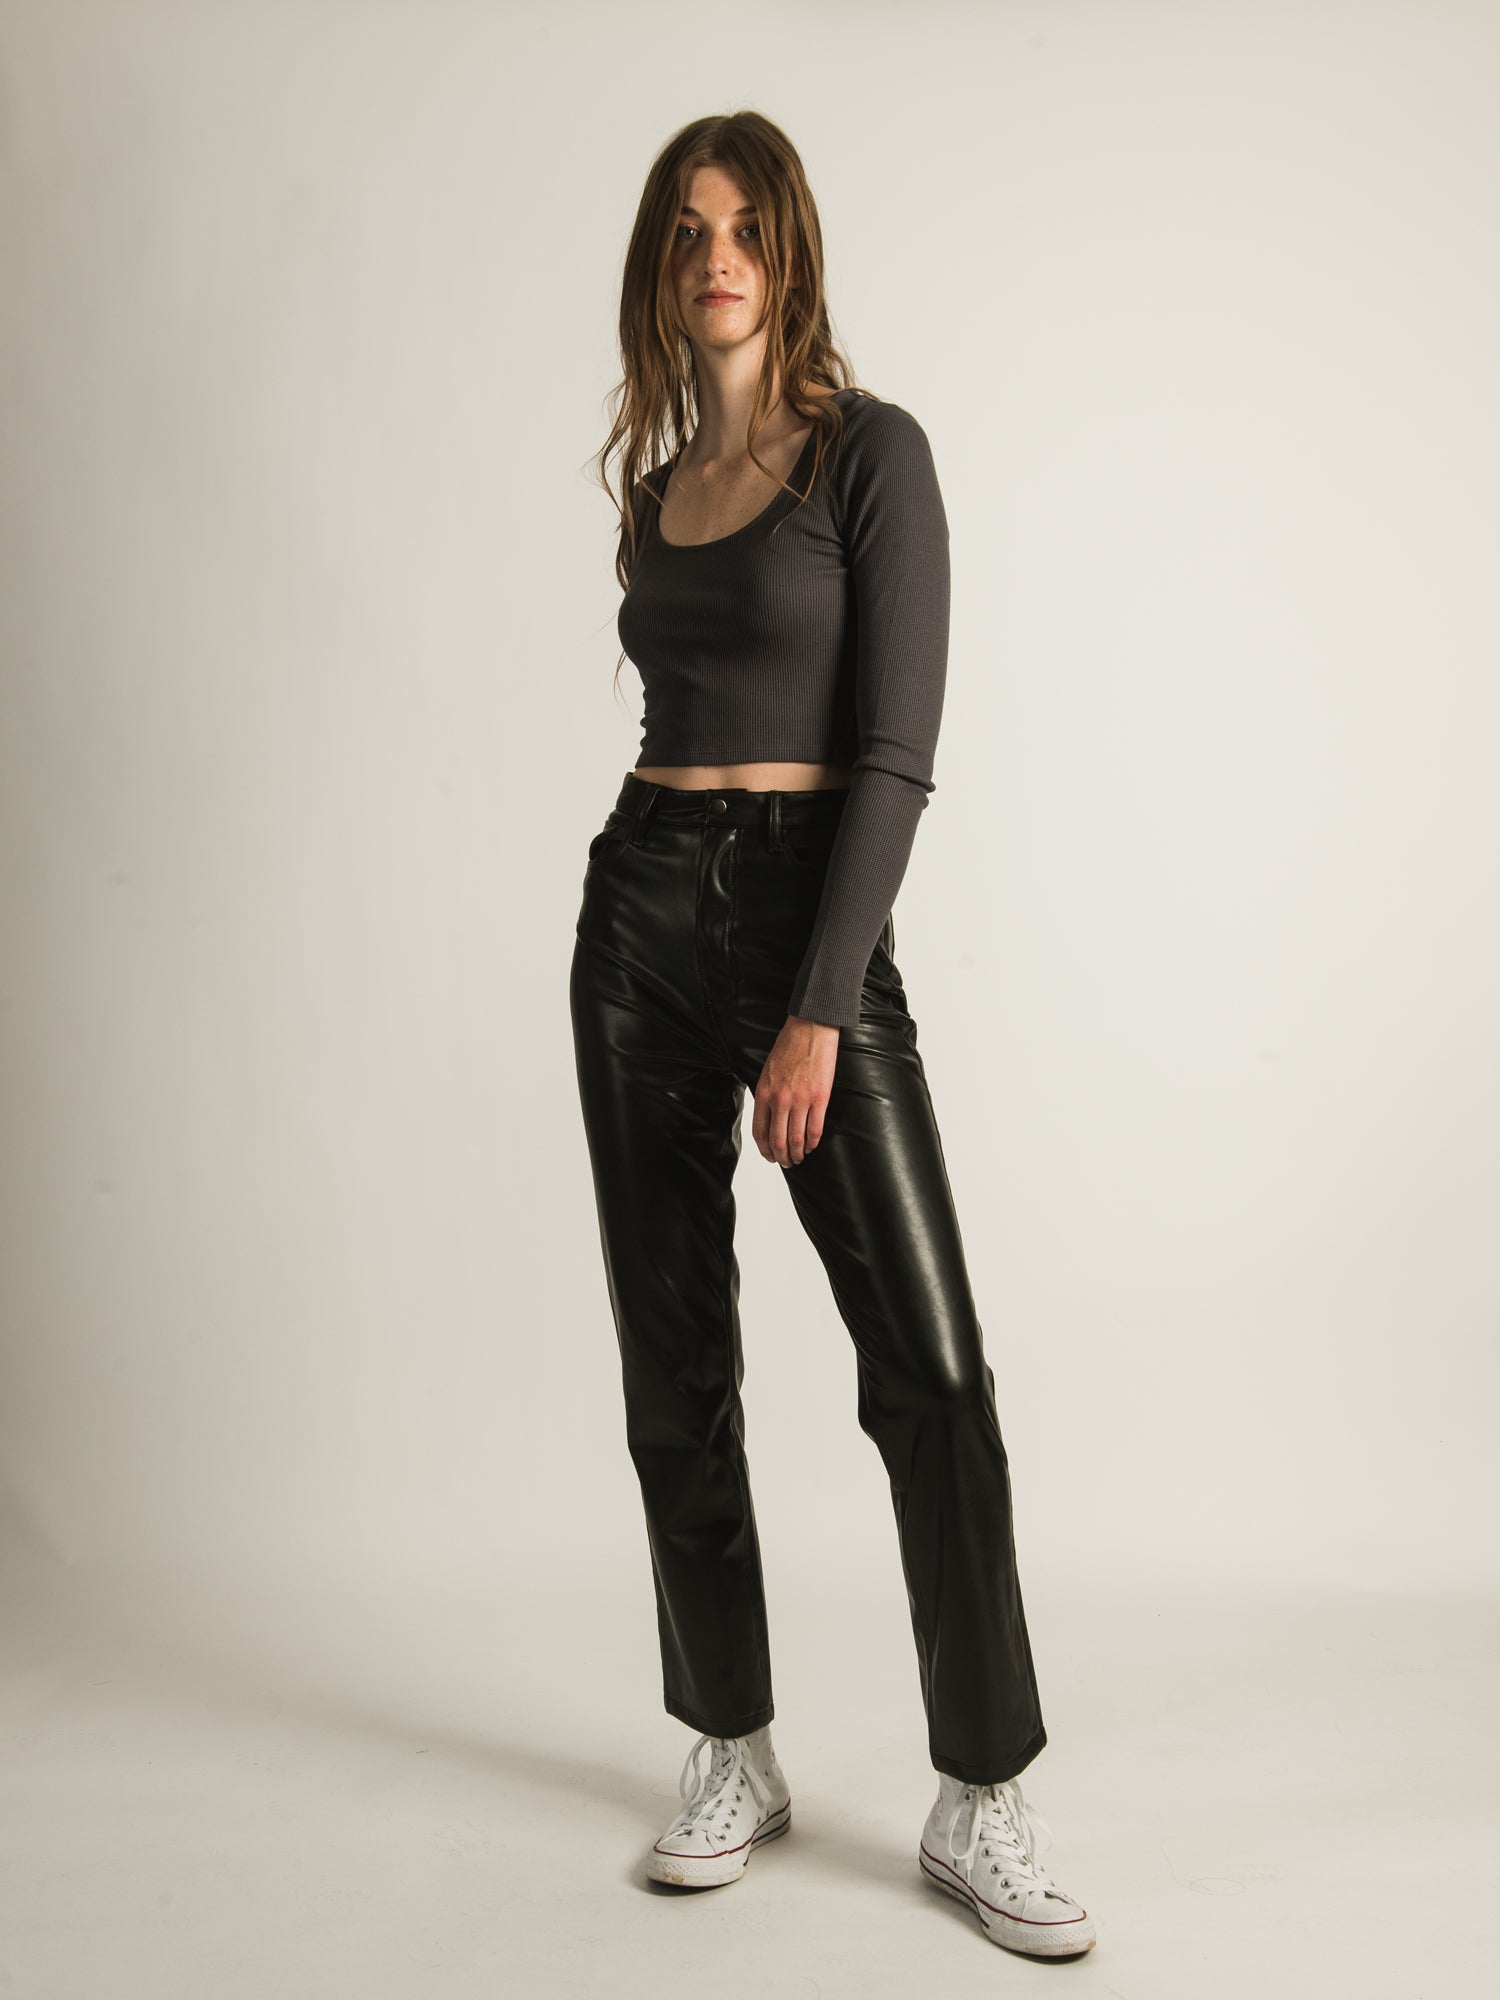 Women's Ultra High-Rise Vegan Leather Dad Pants, Women's Clearance